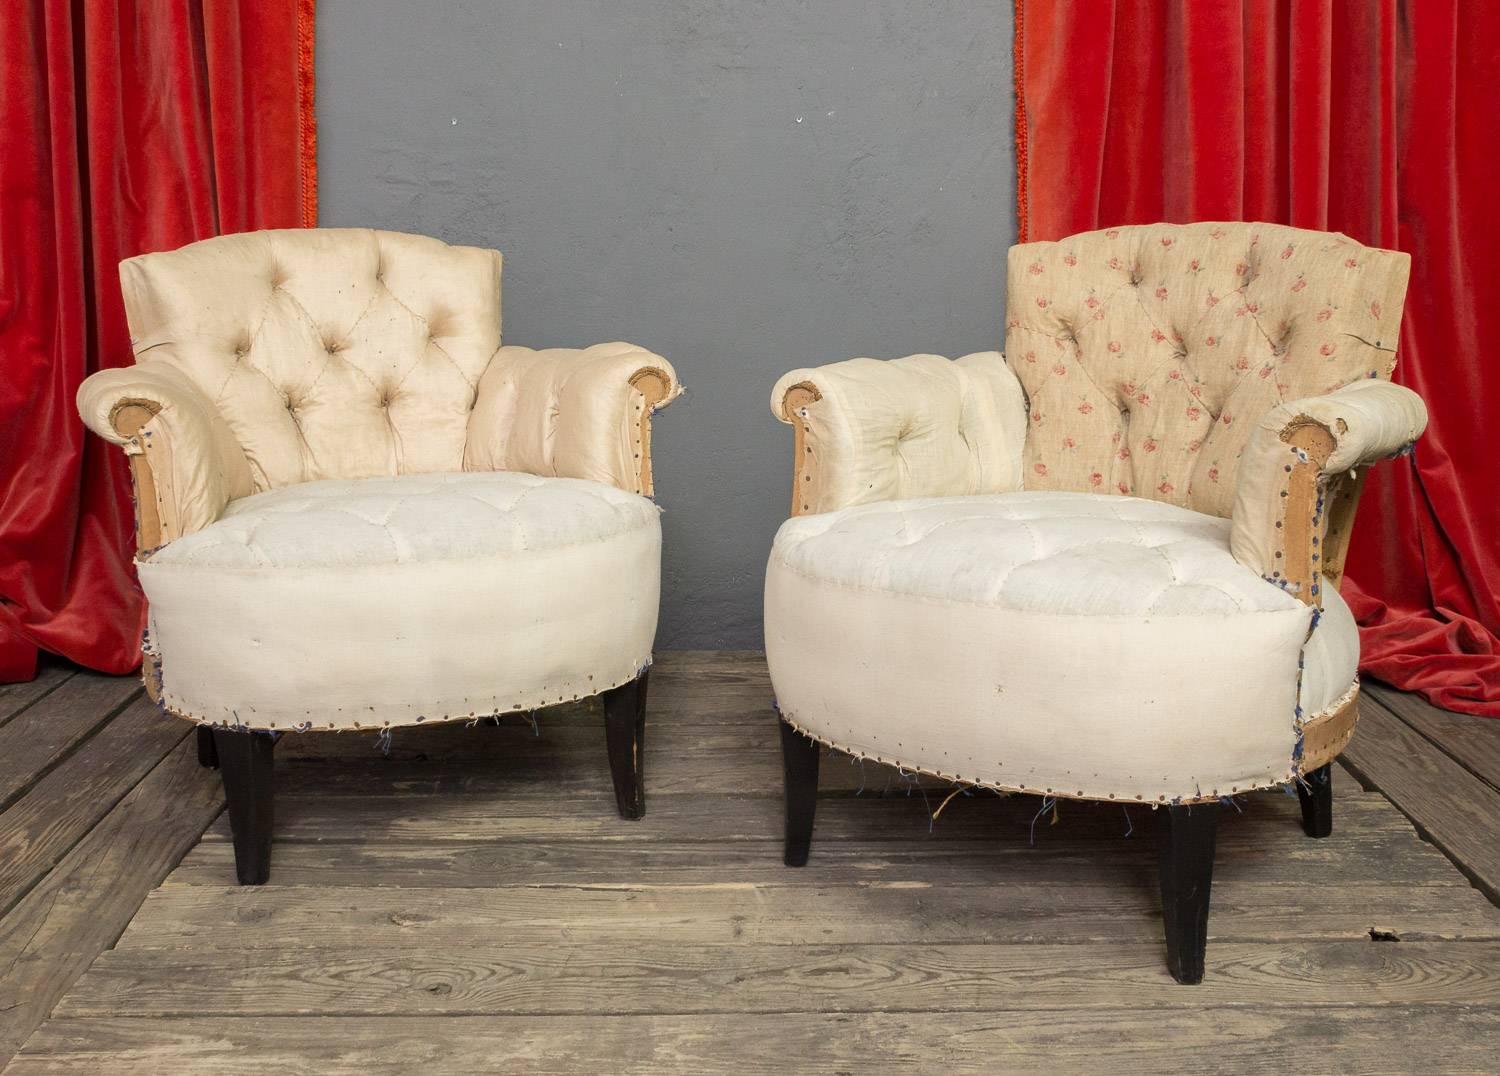 Great pair of armchairs, most likely made circa 1930, they have been stripped down to the muslin. Small in size but loaded with style. Sold as is.